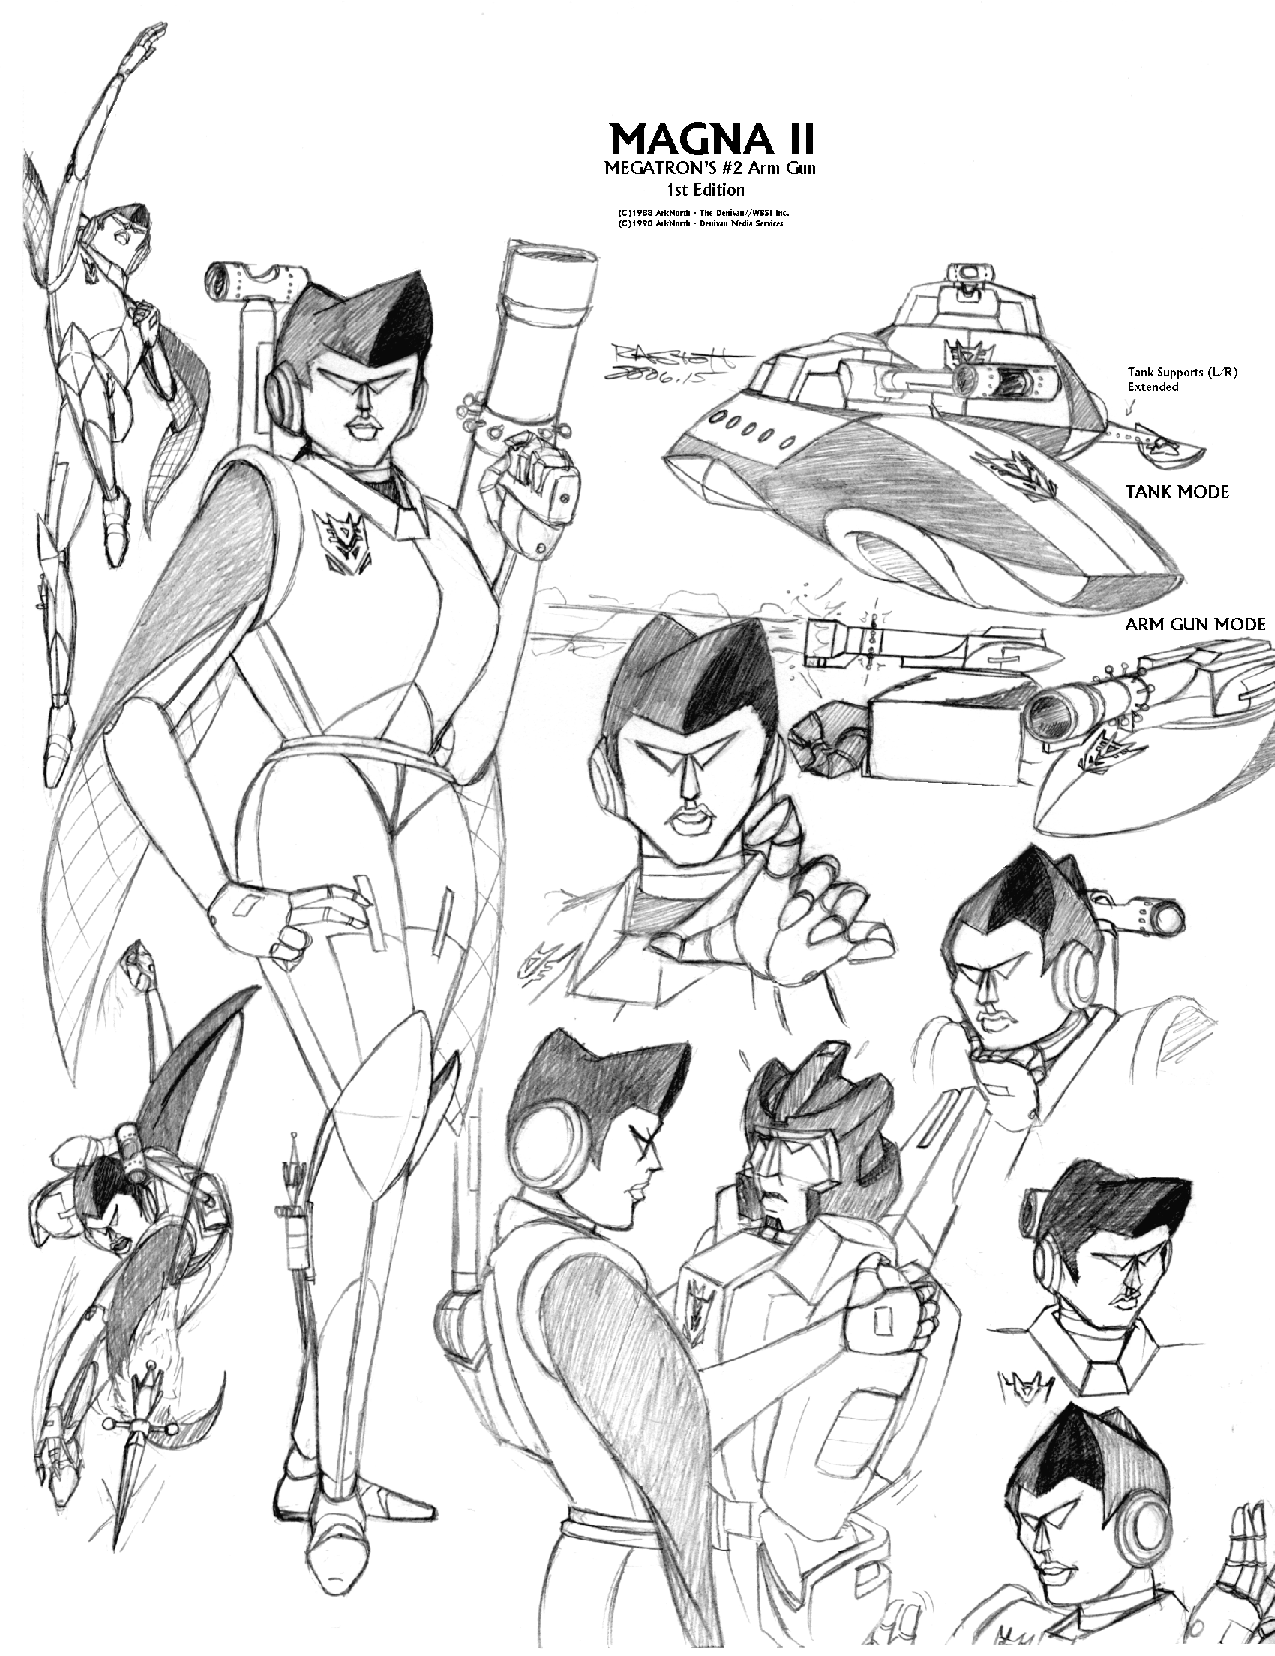 Magna II's original character study from 1988